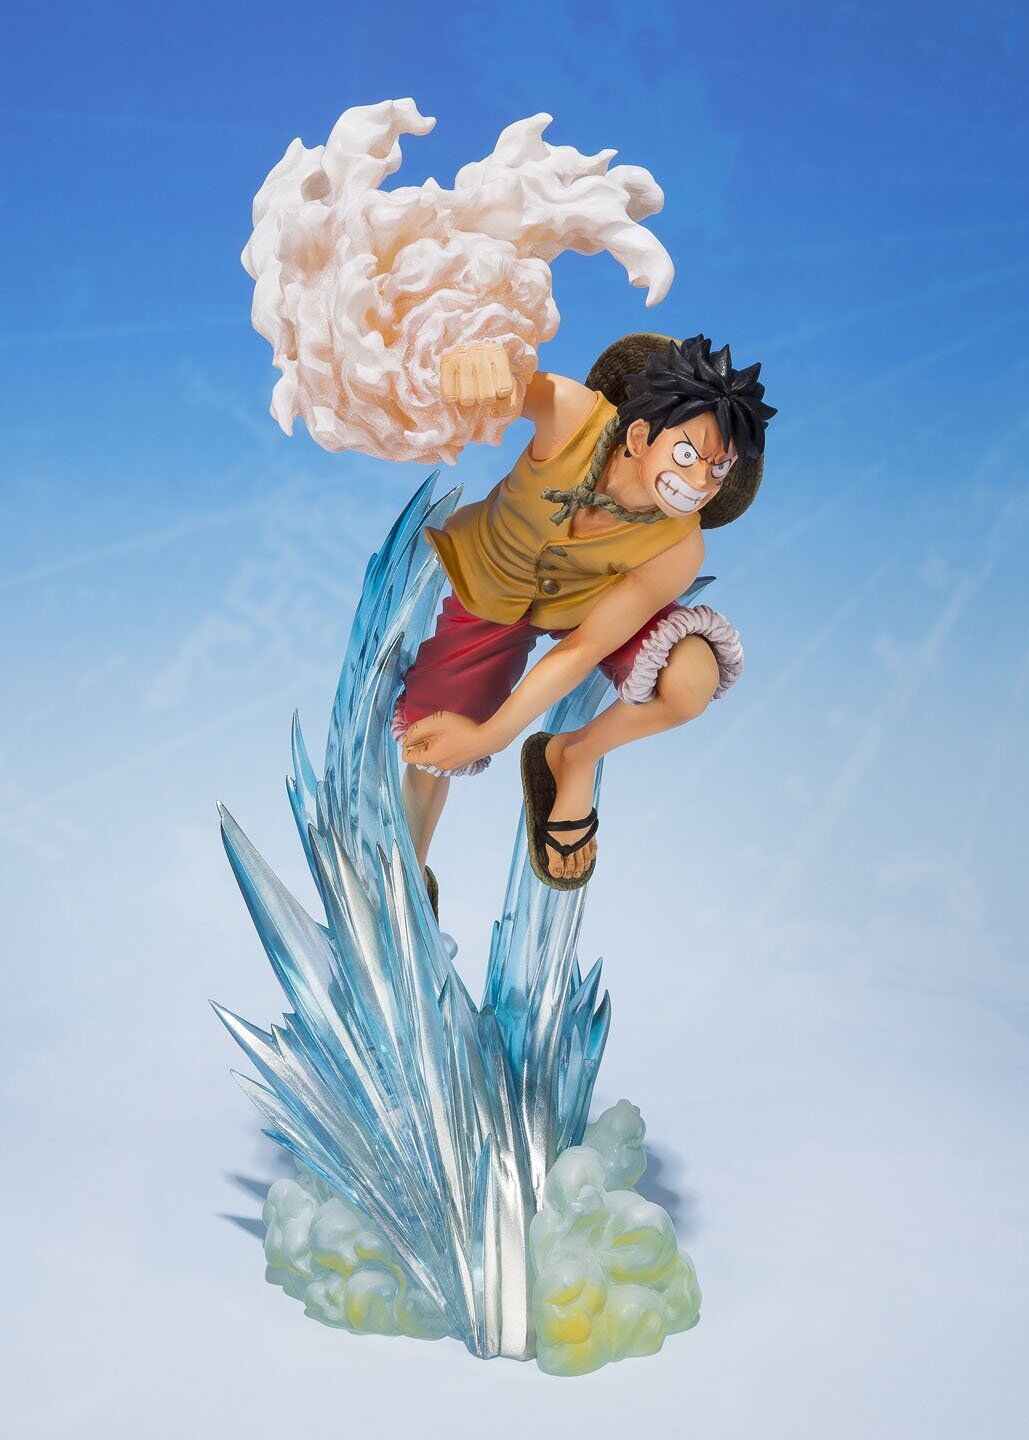 ONE PIECE MONKEY D. LUFFY BROTHER'S BOND S.H. FIGUARTS FIGURE